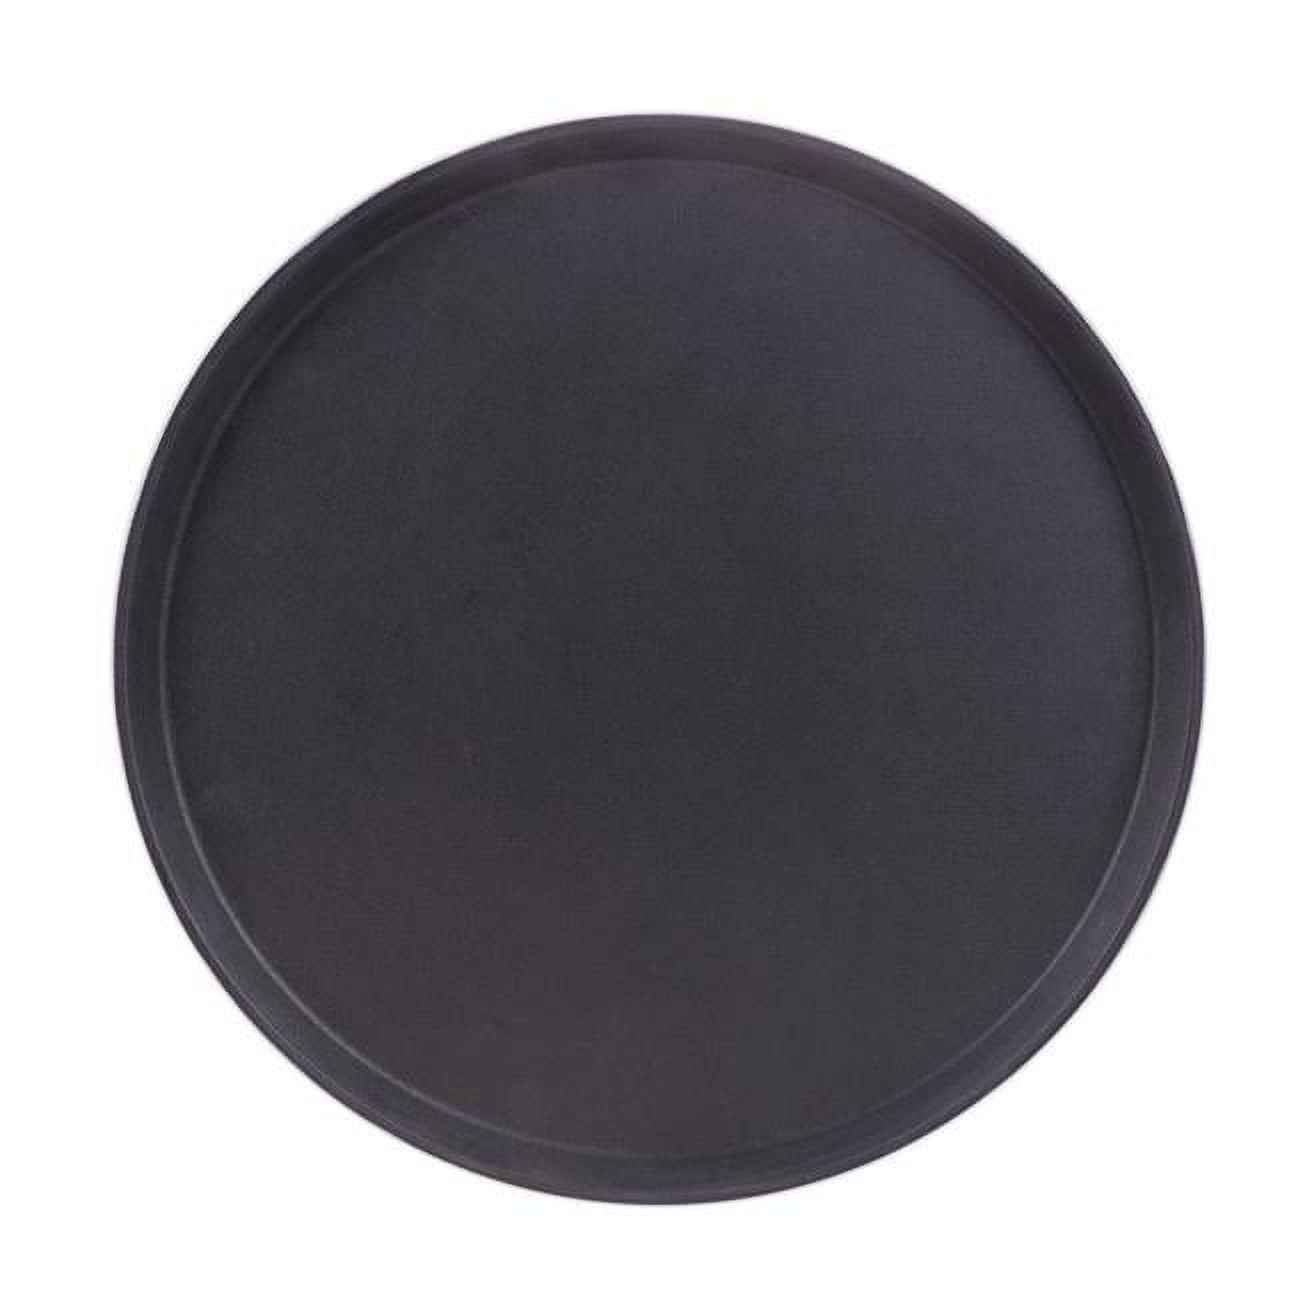 Kcaf-003 18 In. Round Rubber-lined Serving Tray